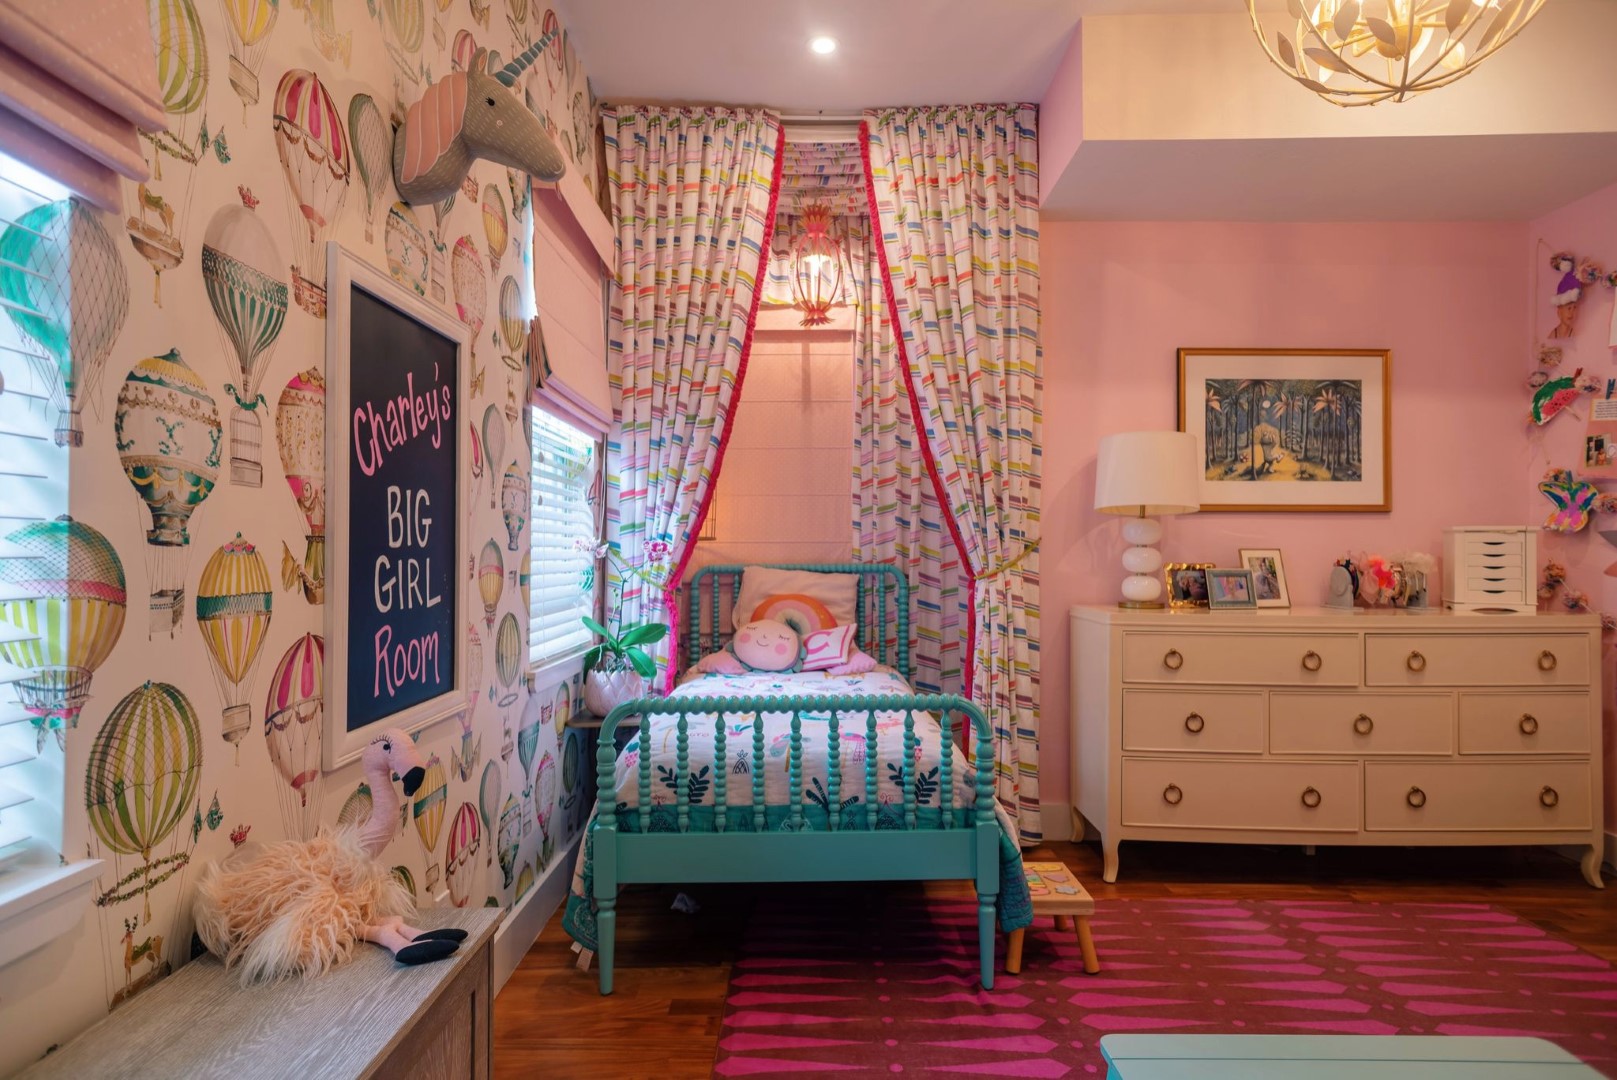 16 Cute Eclectic Kids' Room Interiors That Are Just Charming